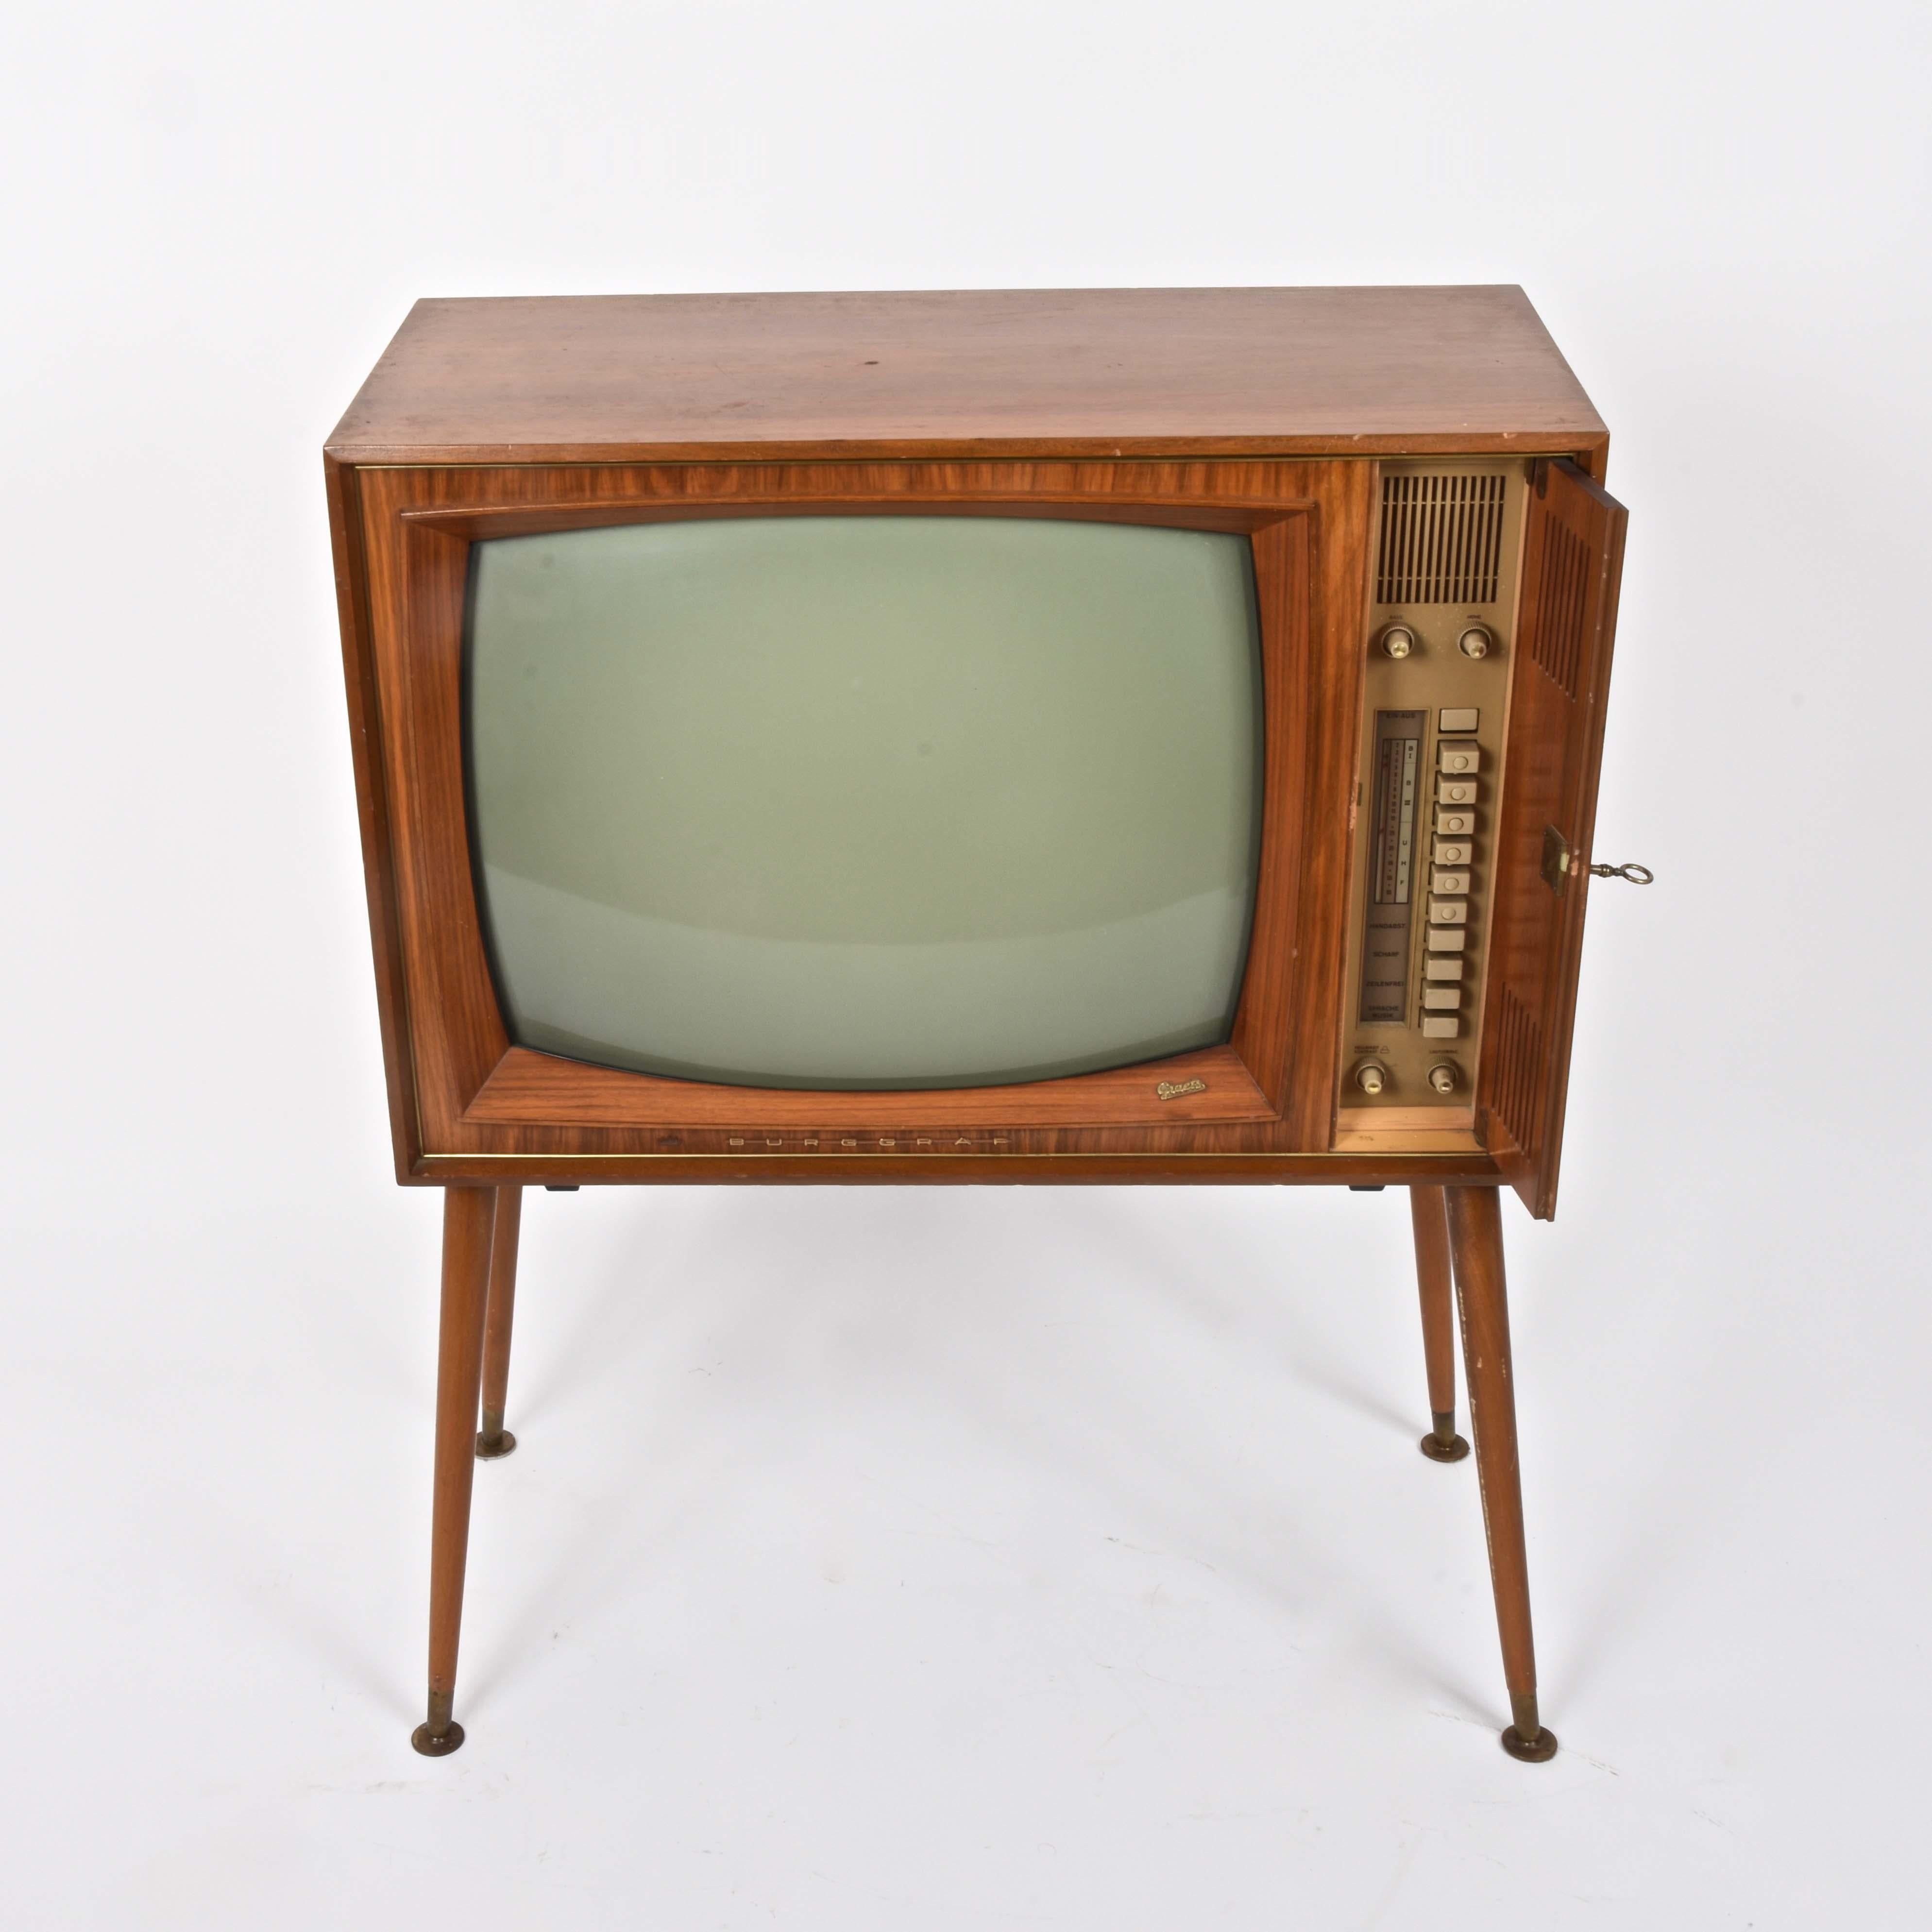 Beautiful Graetz Burggraf furniture TV set.
We do not know if the television is functioning. It has not been rewired.
A piece that enriches any environment.